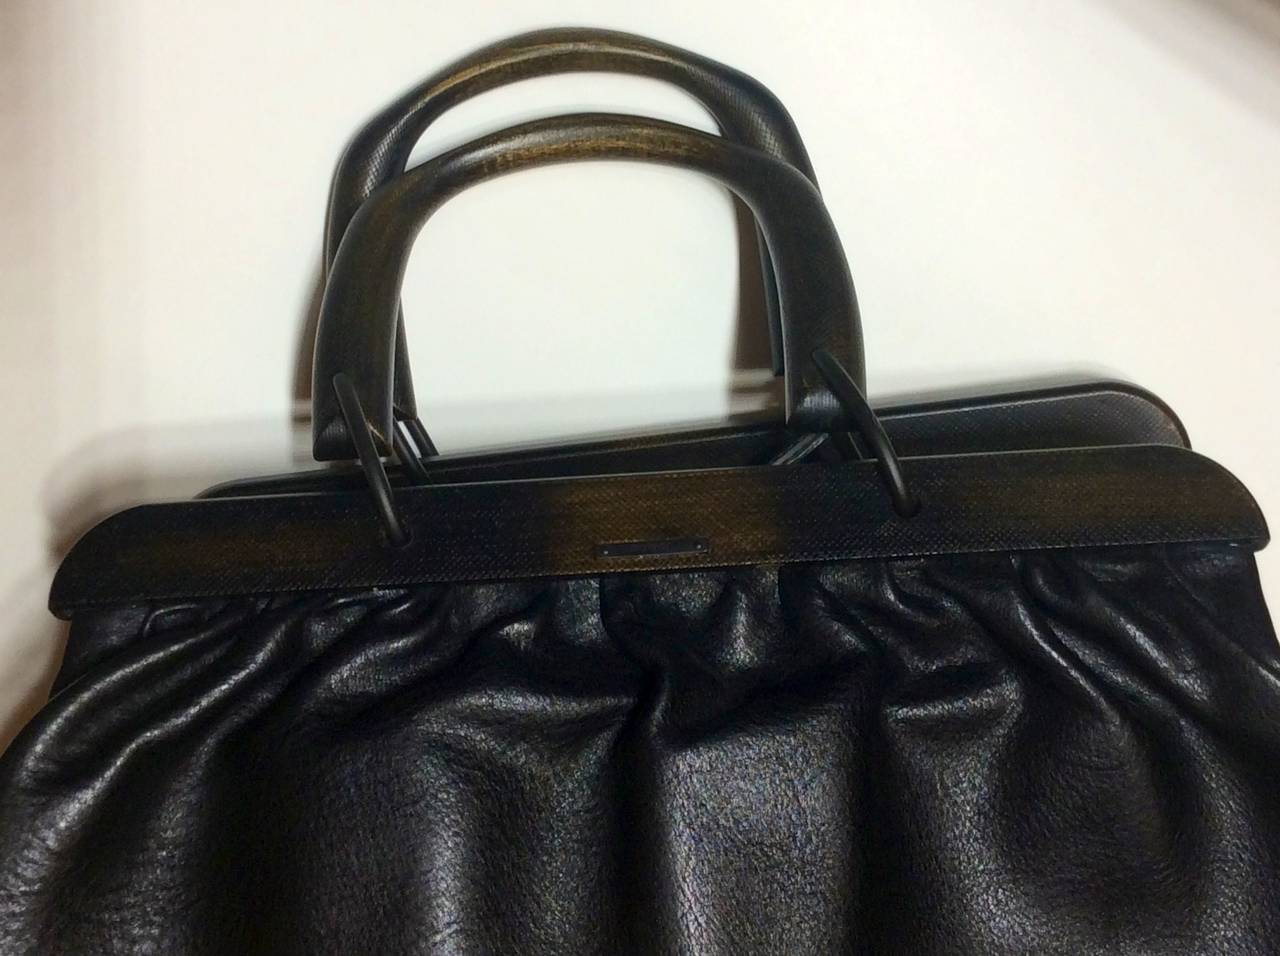 This is a vintage Tom Ford designed for Gucci durable black leather handbag with wood trim and handles. Interior leather flaps with buckle closure.
Pristine condition. 
Measurements approximately 16 x 10 x 6